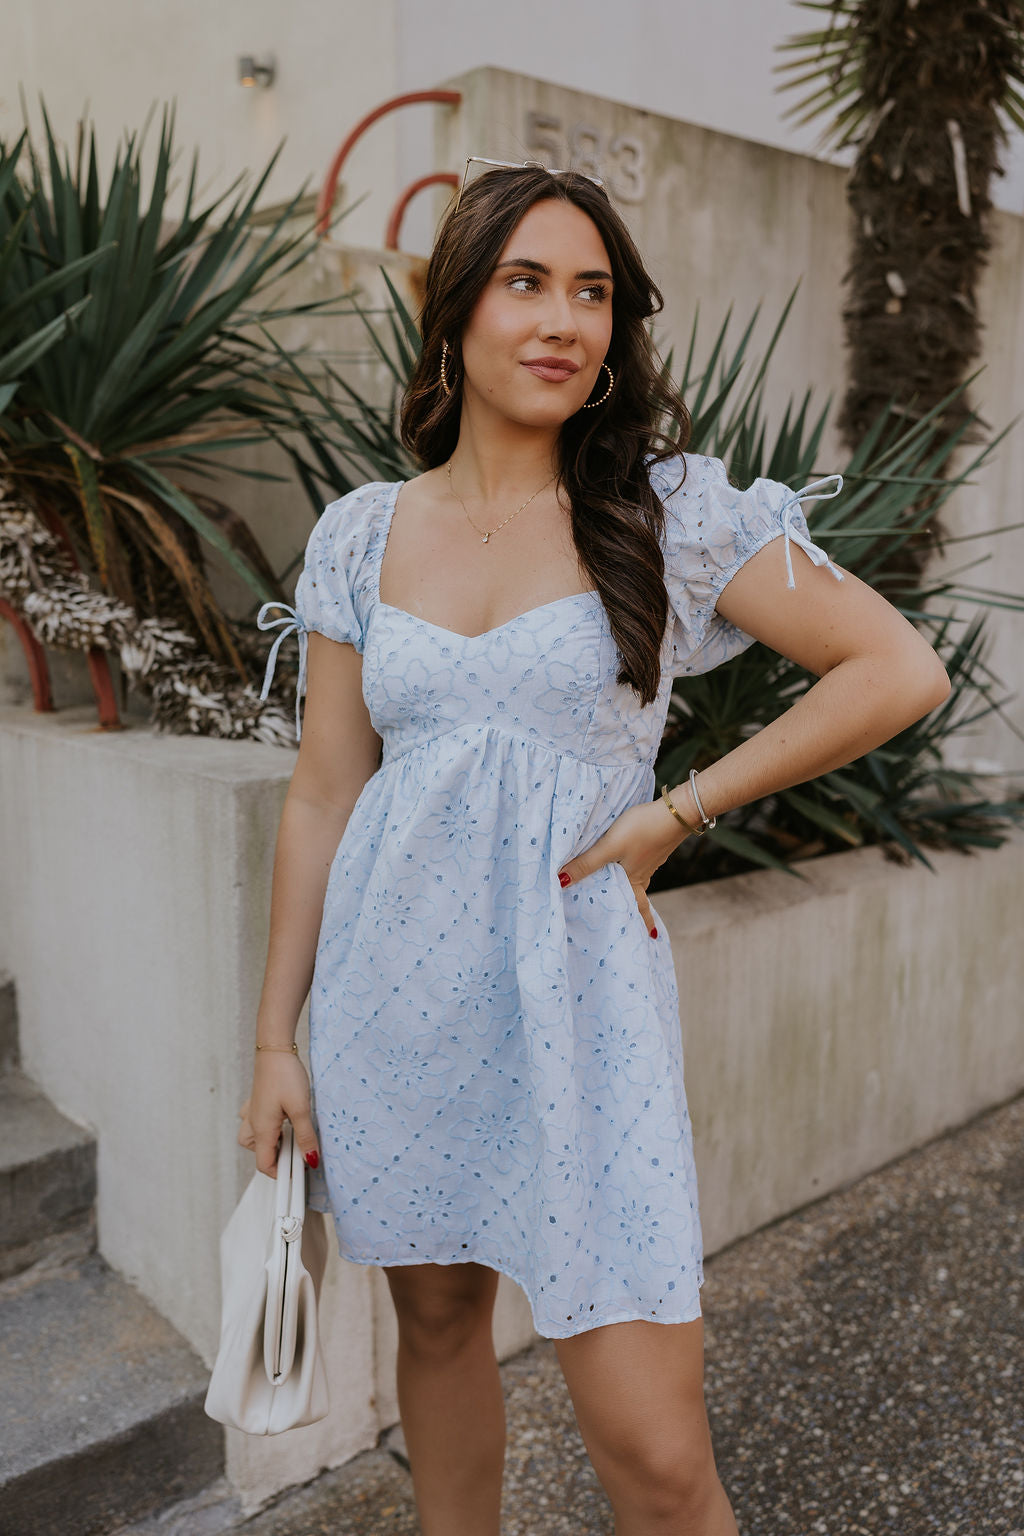 zfront view of female model wearing the The Ella Light Blue Eyelet Mini Dress which features light blue cotton fabric with an eyelet floral pattern, mini length, light blue lining, a sweetheart neckline, short puff sleeves with tie details, and a smocked back.